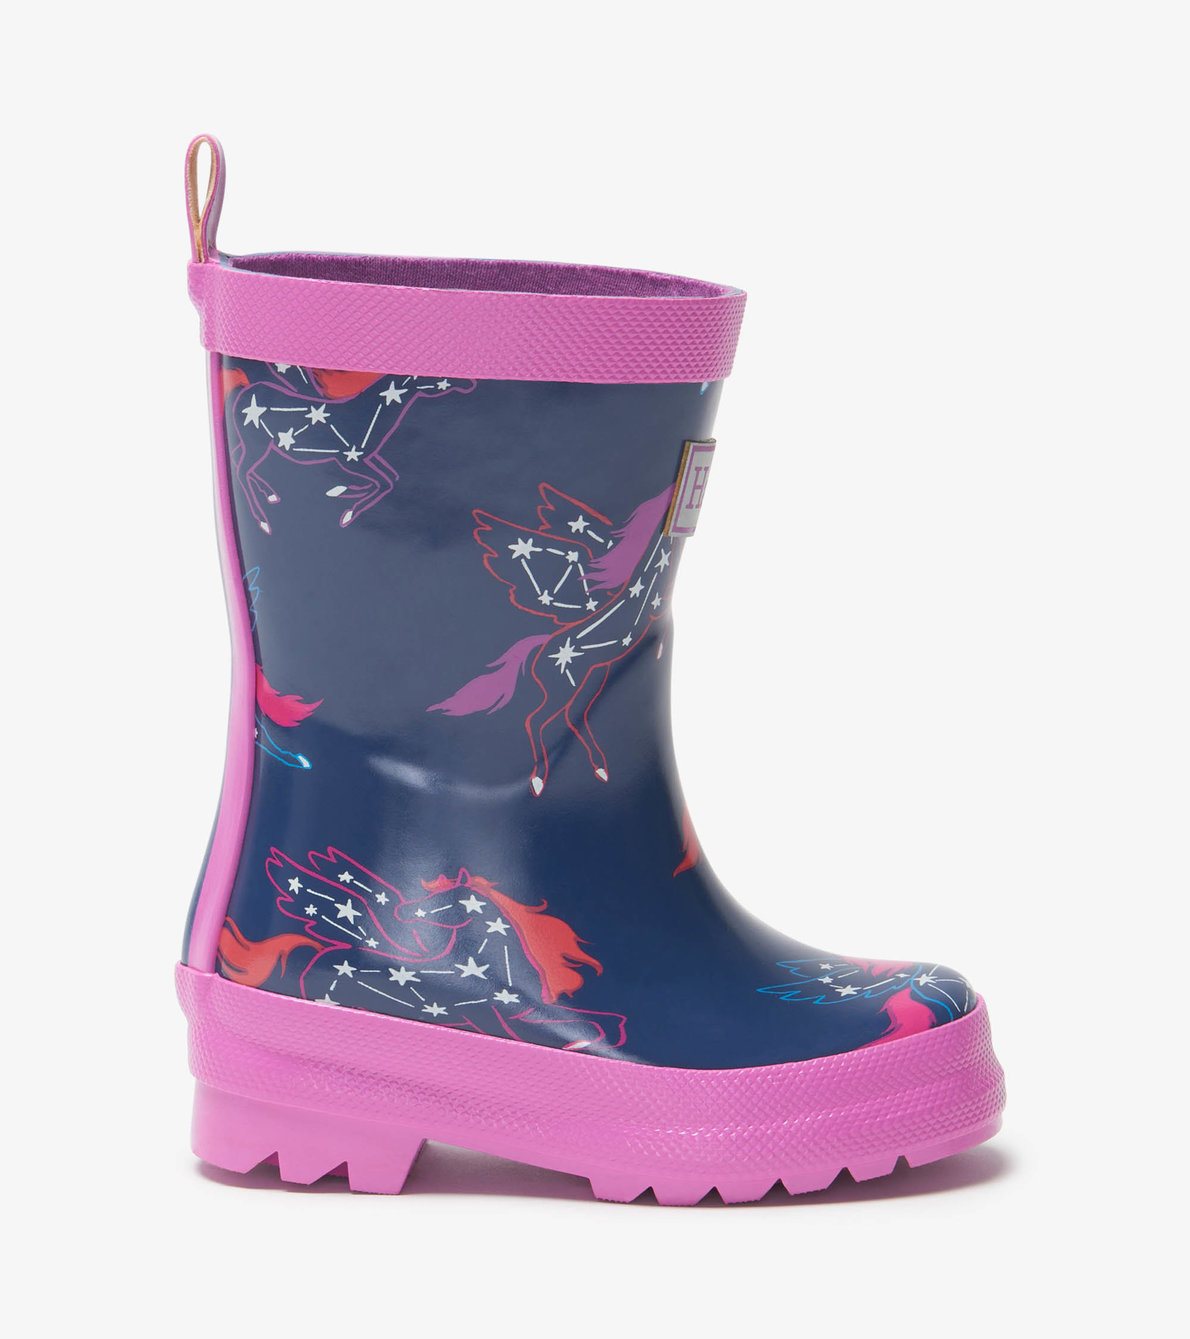 View larger image of My 1st Rain Boots - Pegasus Constellations